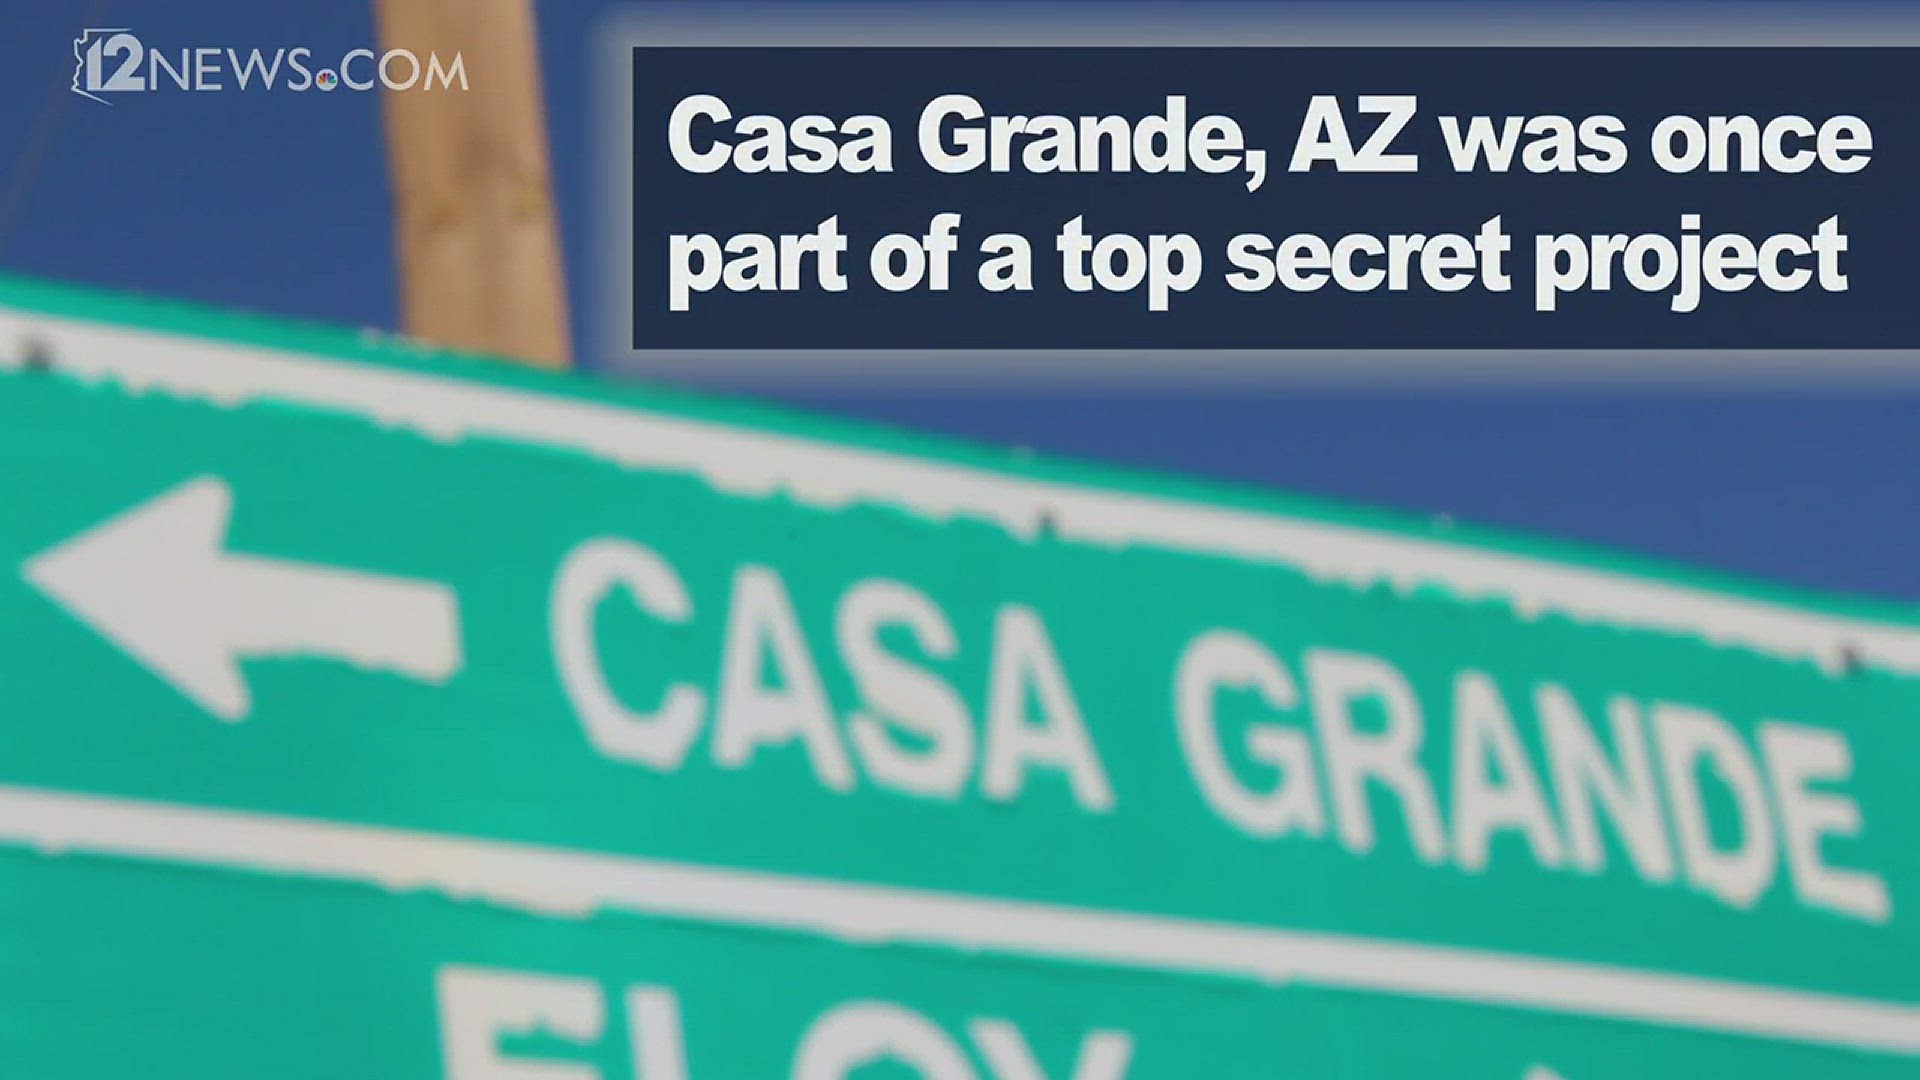 Casa Grande was once part of a top secret government project during the Cold War.